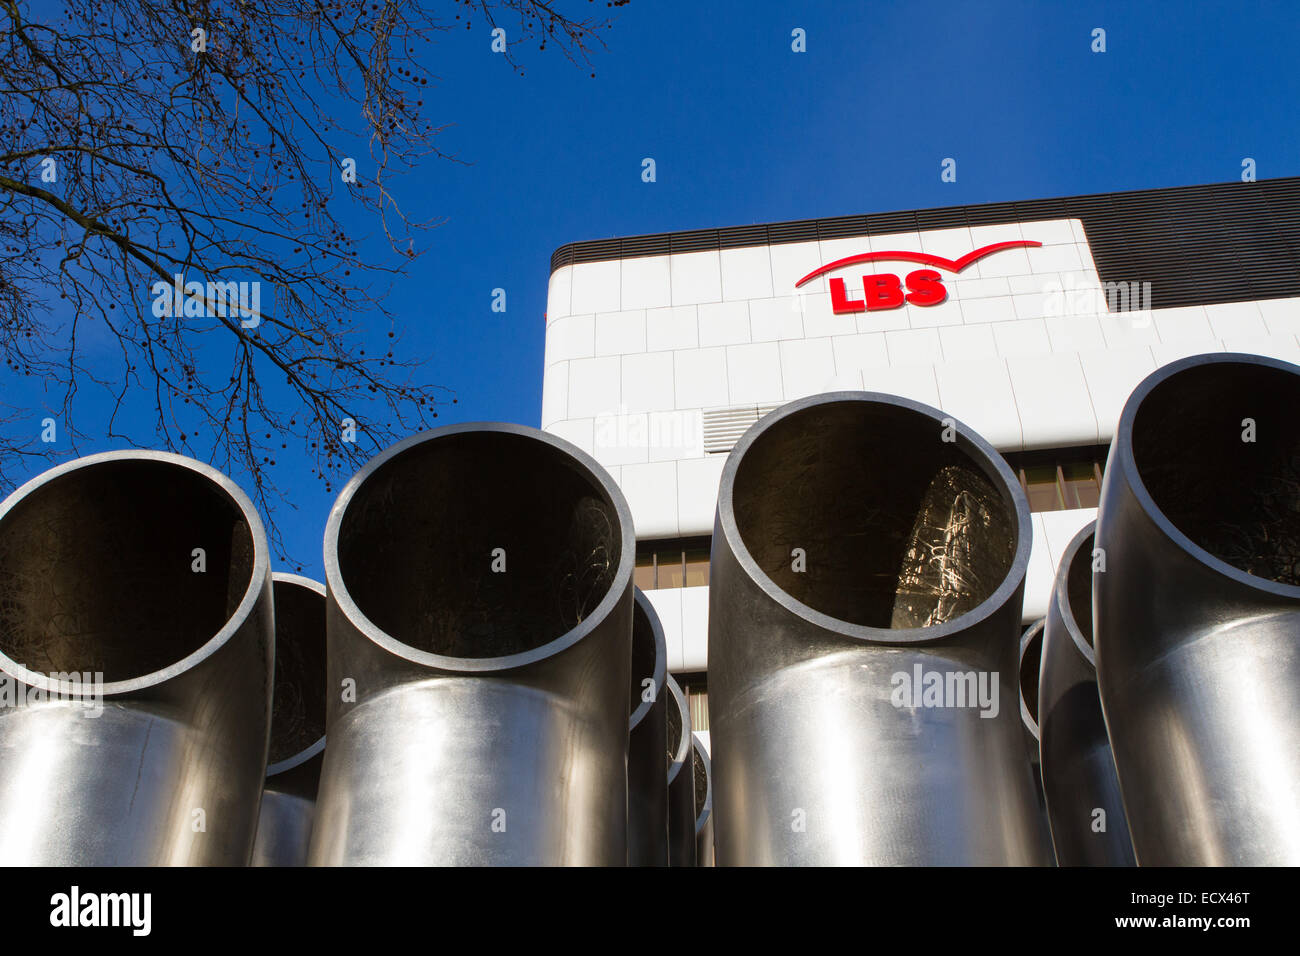 Ventilation ducts outside the entrance to the LBS office building in Münster, NRW, Germany Stock Photo